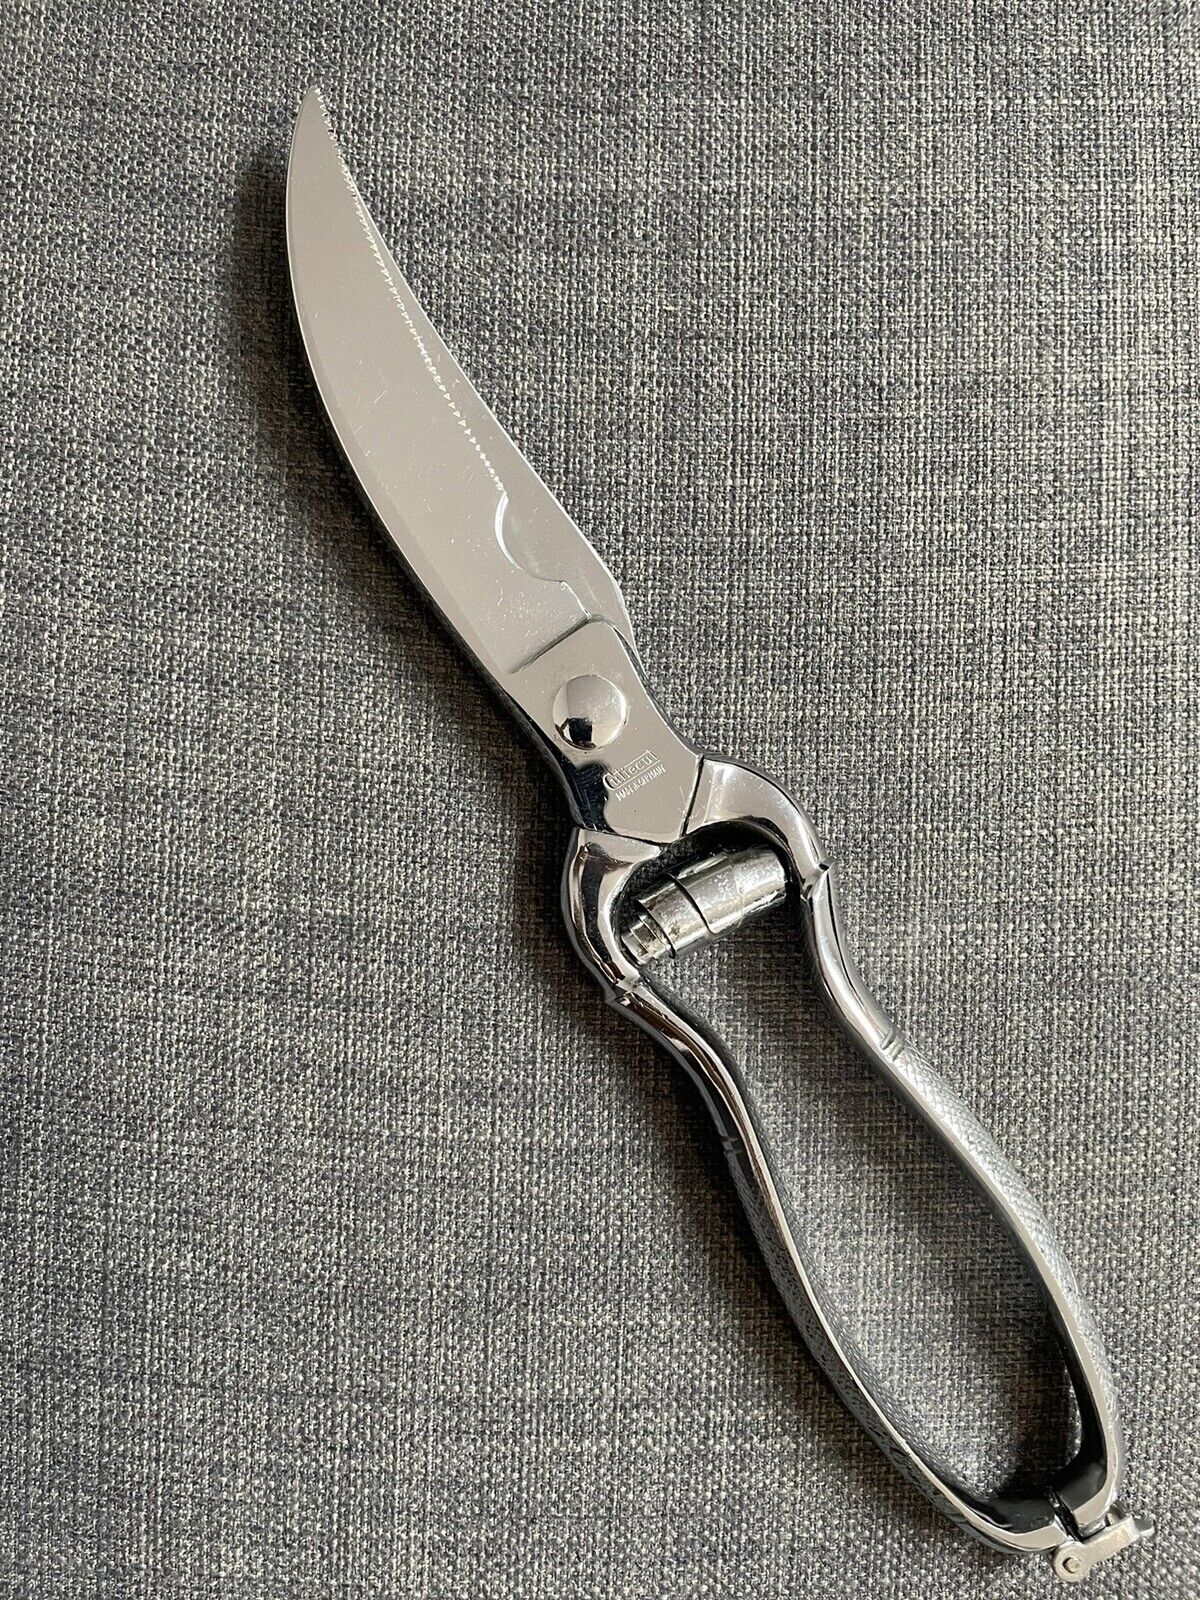 Rare Cutiecut Stainless Steel Poultry Meat Shears 10.5” Cutting Tool *Germany *